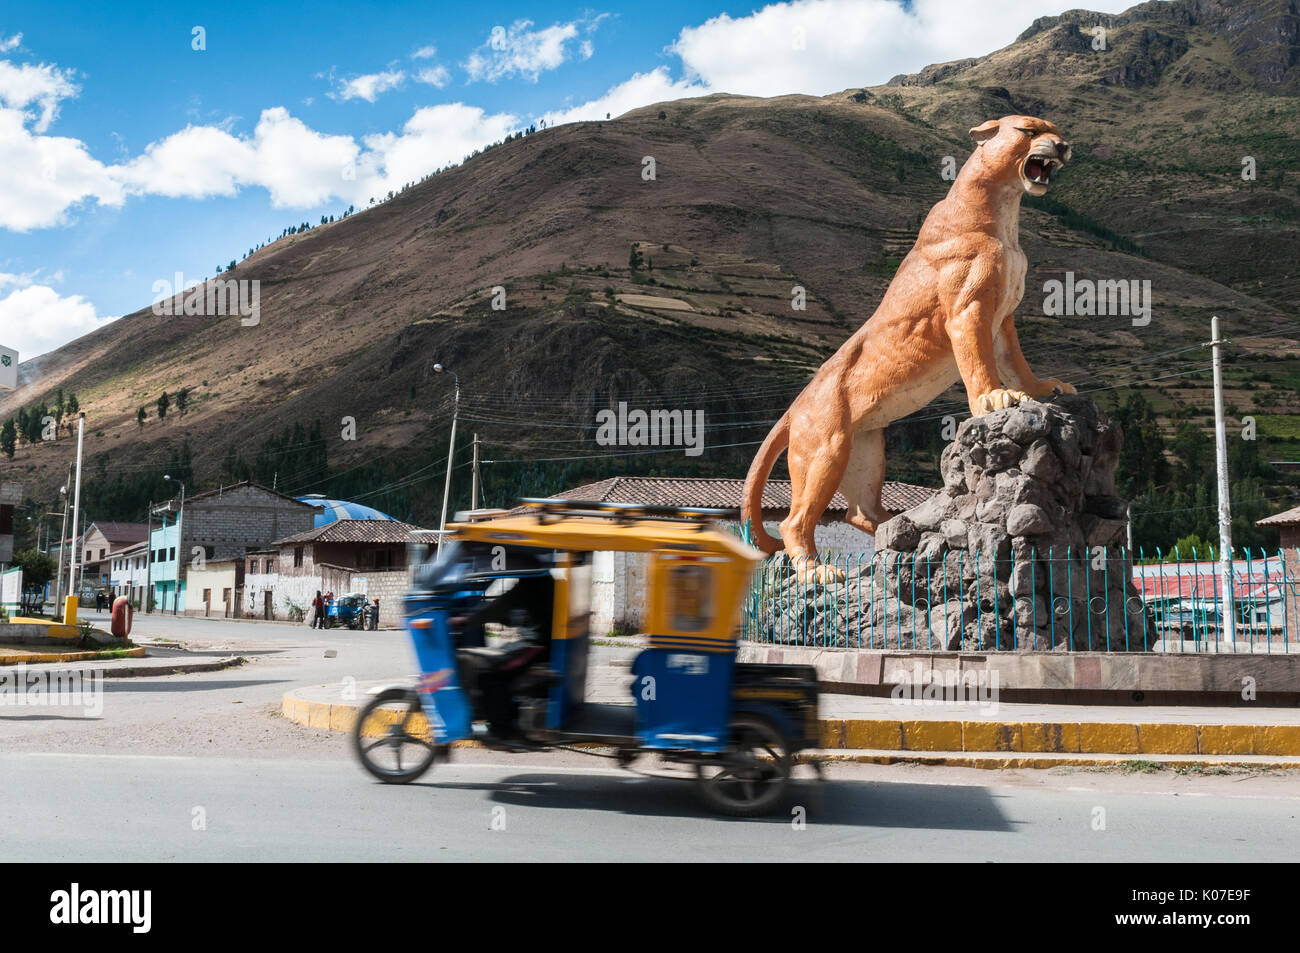 Mototaxi, a popular form of transport in Peru by the statue of puma in a village of Calca near Cusco. Stock Photo